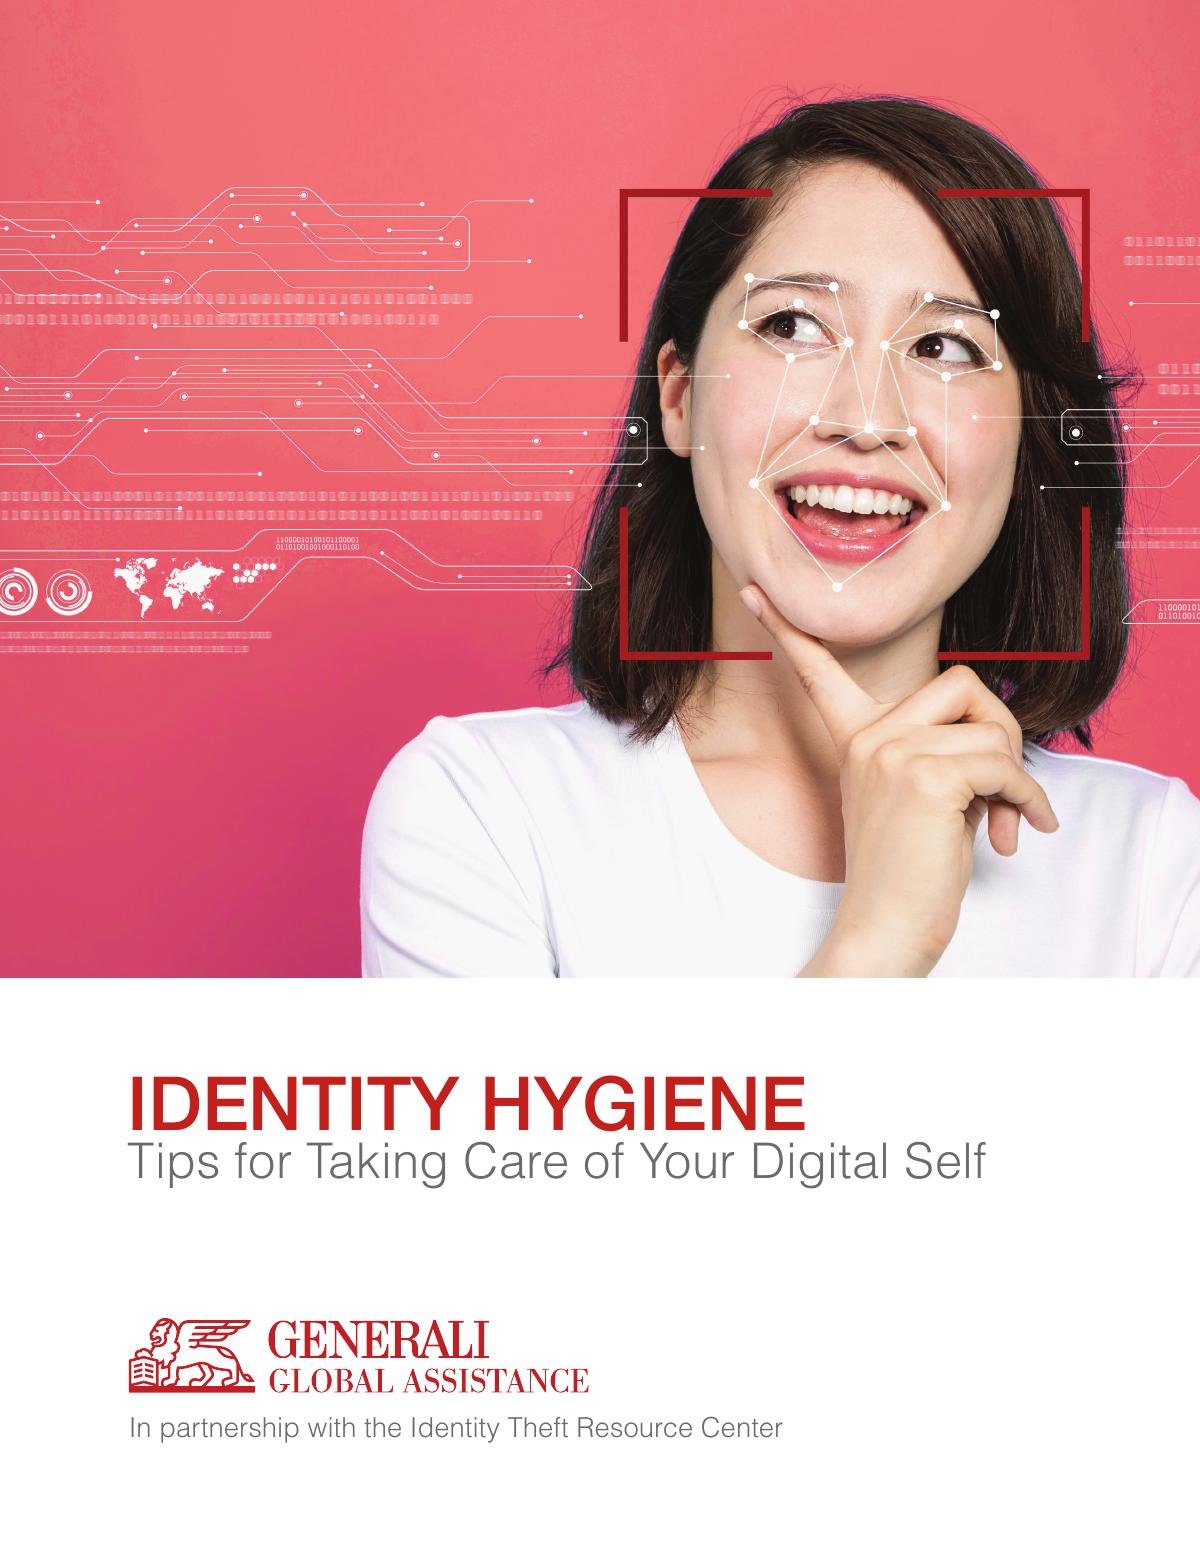 Identity Hygiene: Tips for Taking Care of Your Digital Self